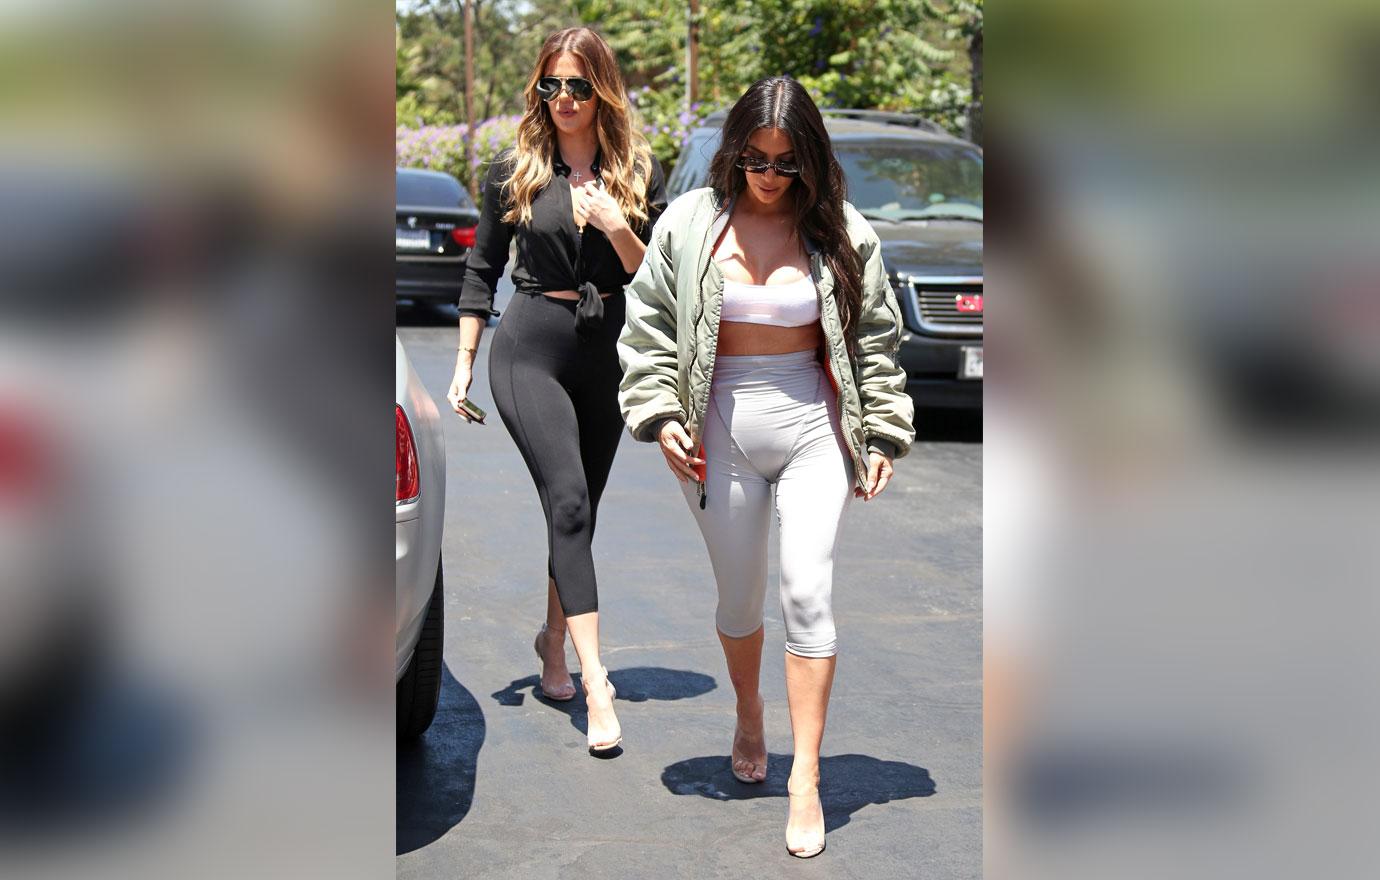 Kim Kardashian Sports MAJOR Camel Toe While Out For Chinese With Khloé